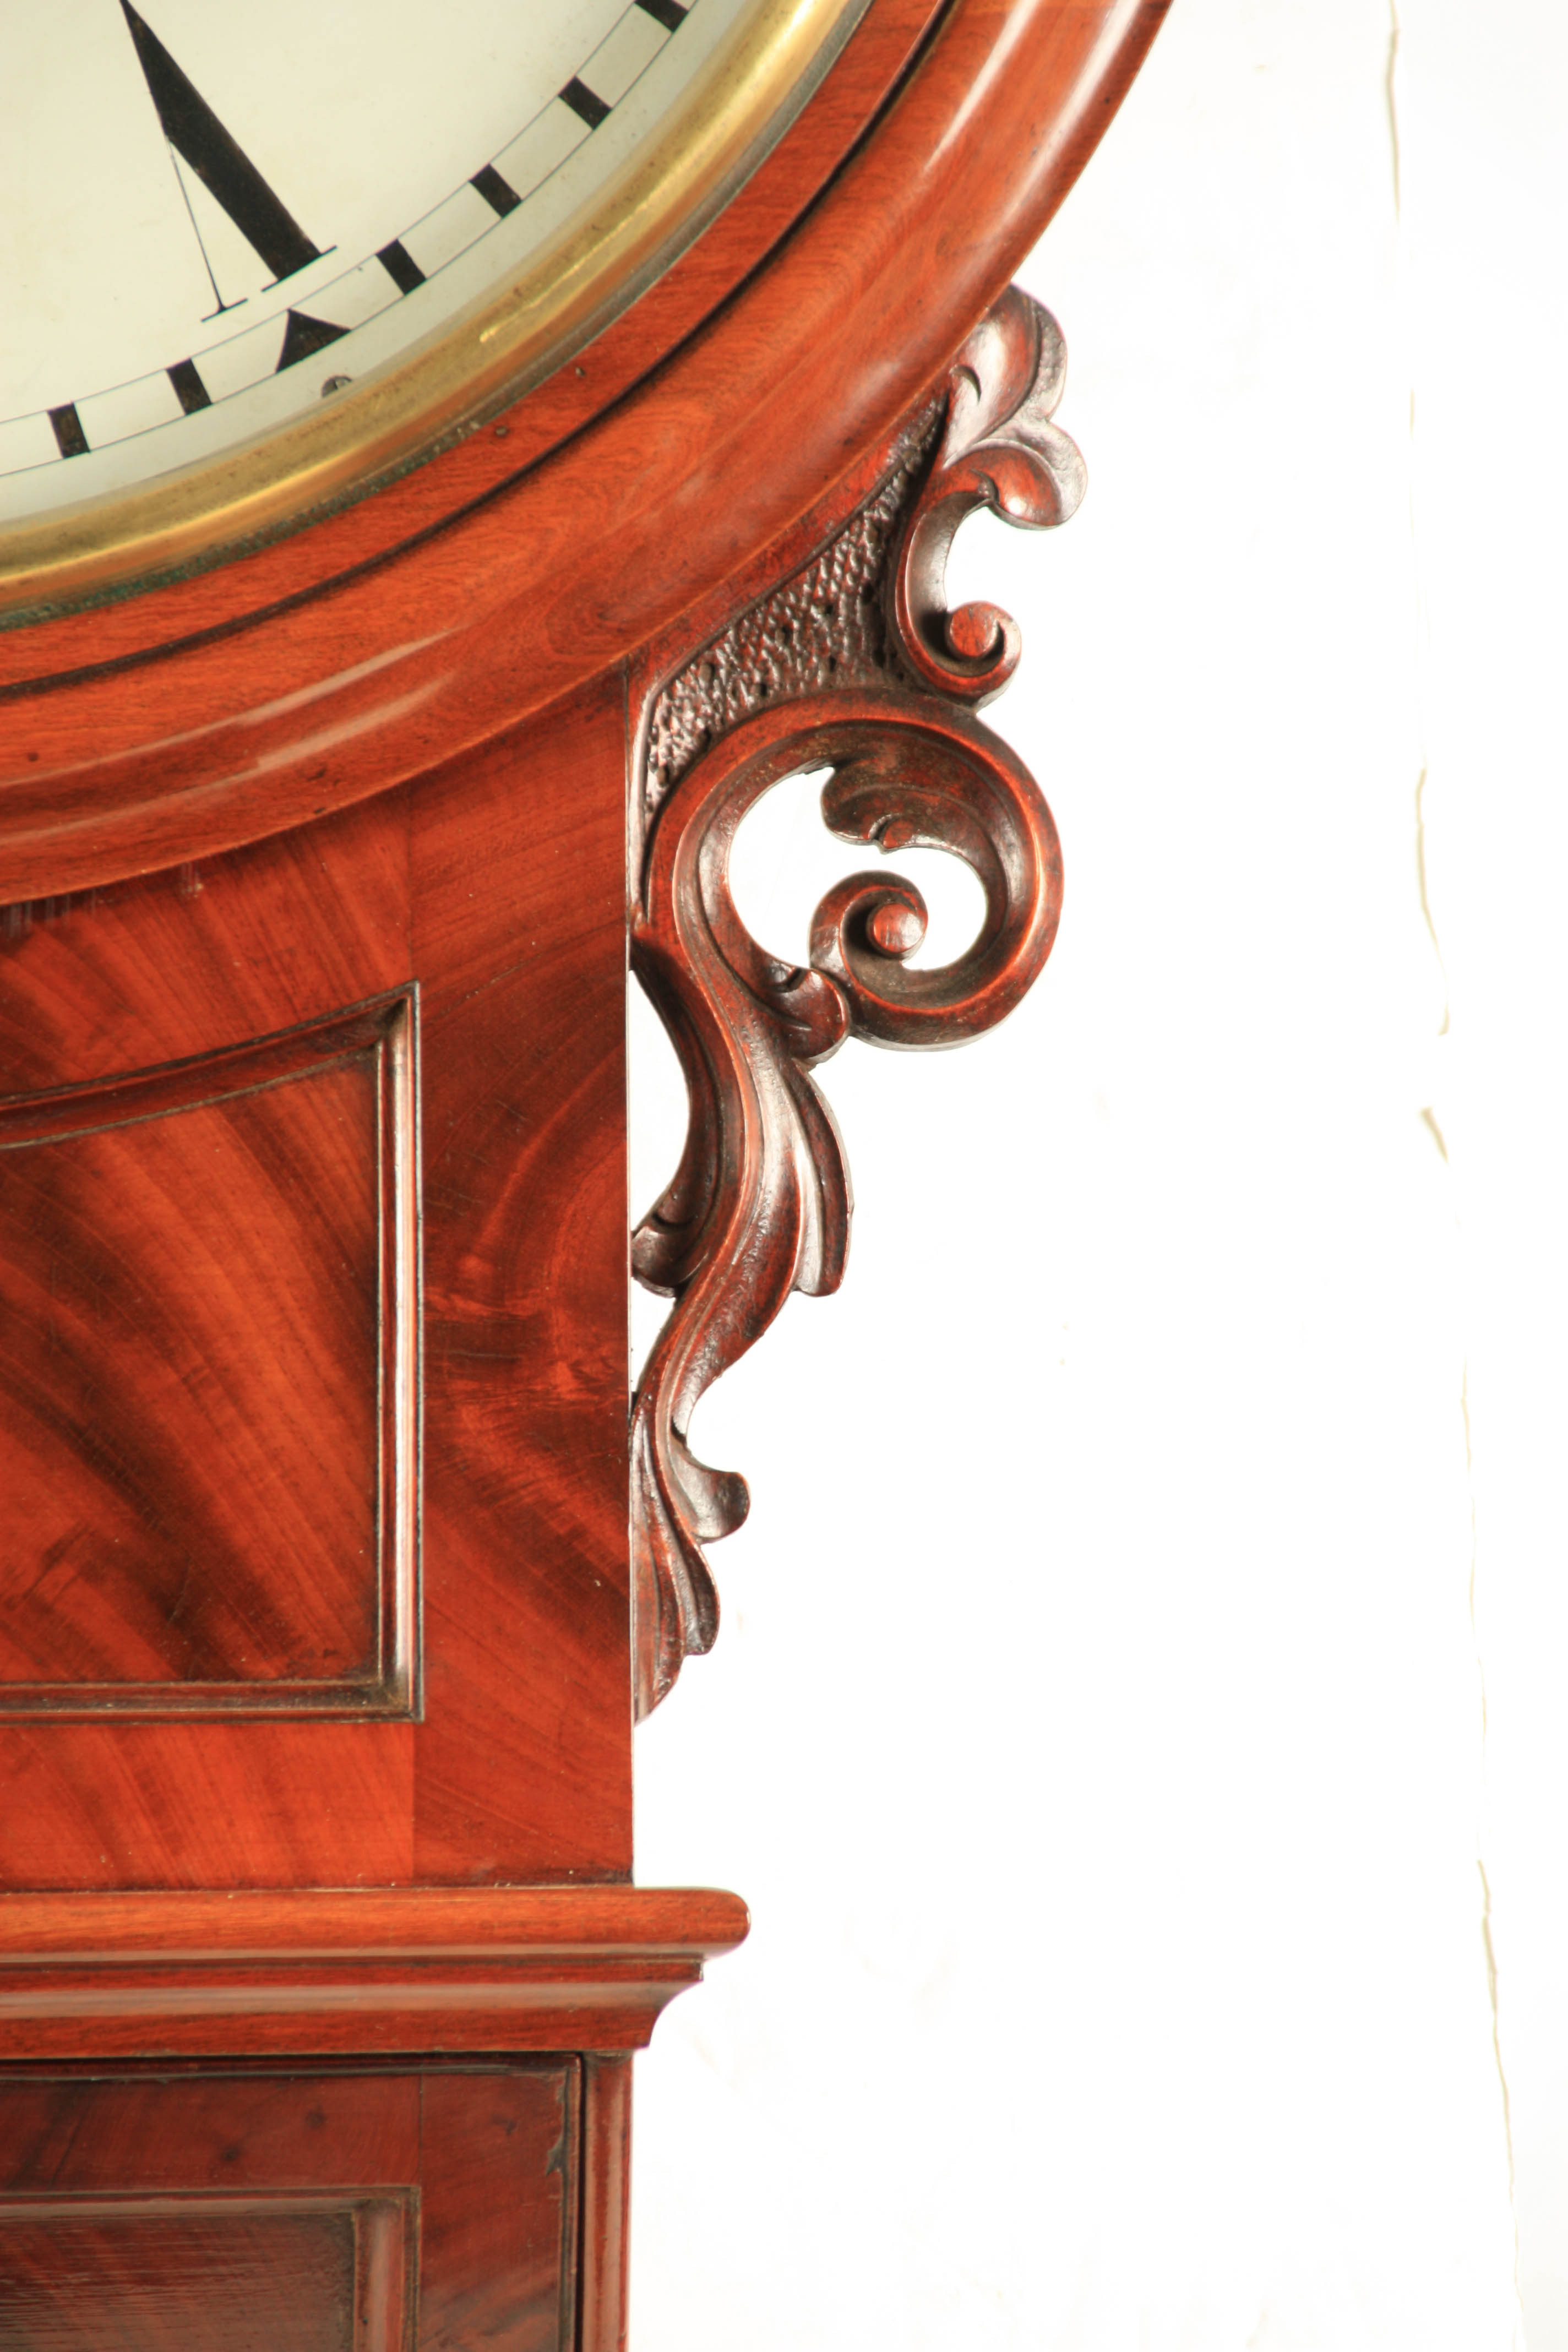 A. FURNACE, KESWICK A FINE QUALITY 19TH CENTURY FIGURED MAHOGANY 18" DIAL FUSEE WALL CLOCK OF - Image 2 of 10